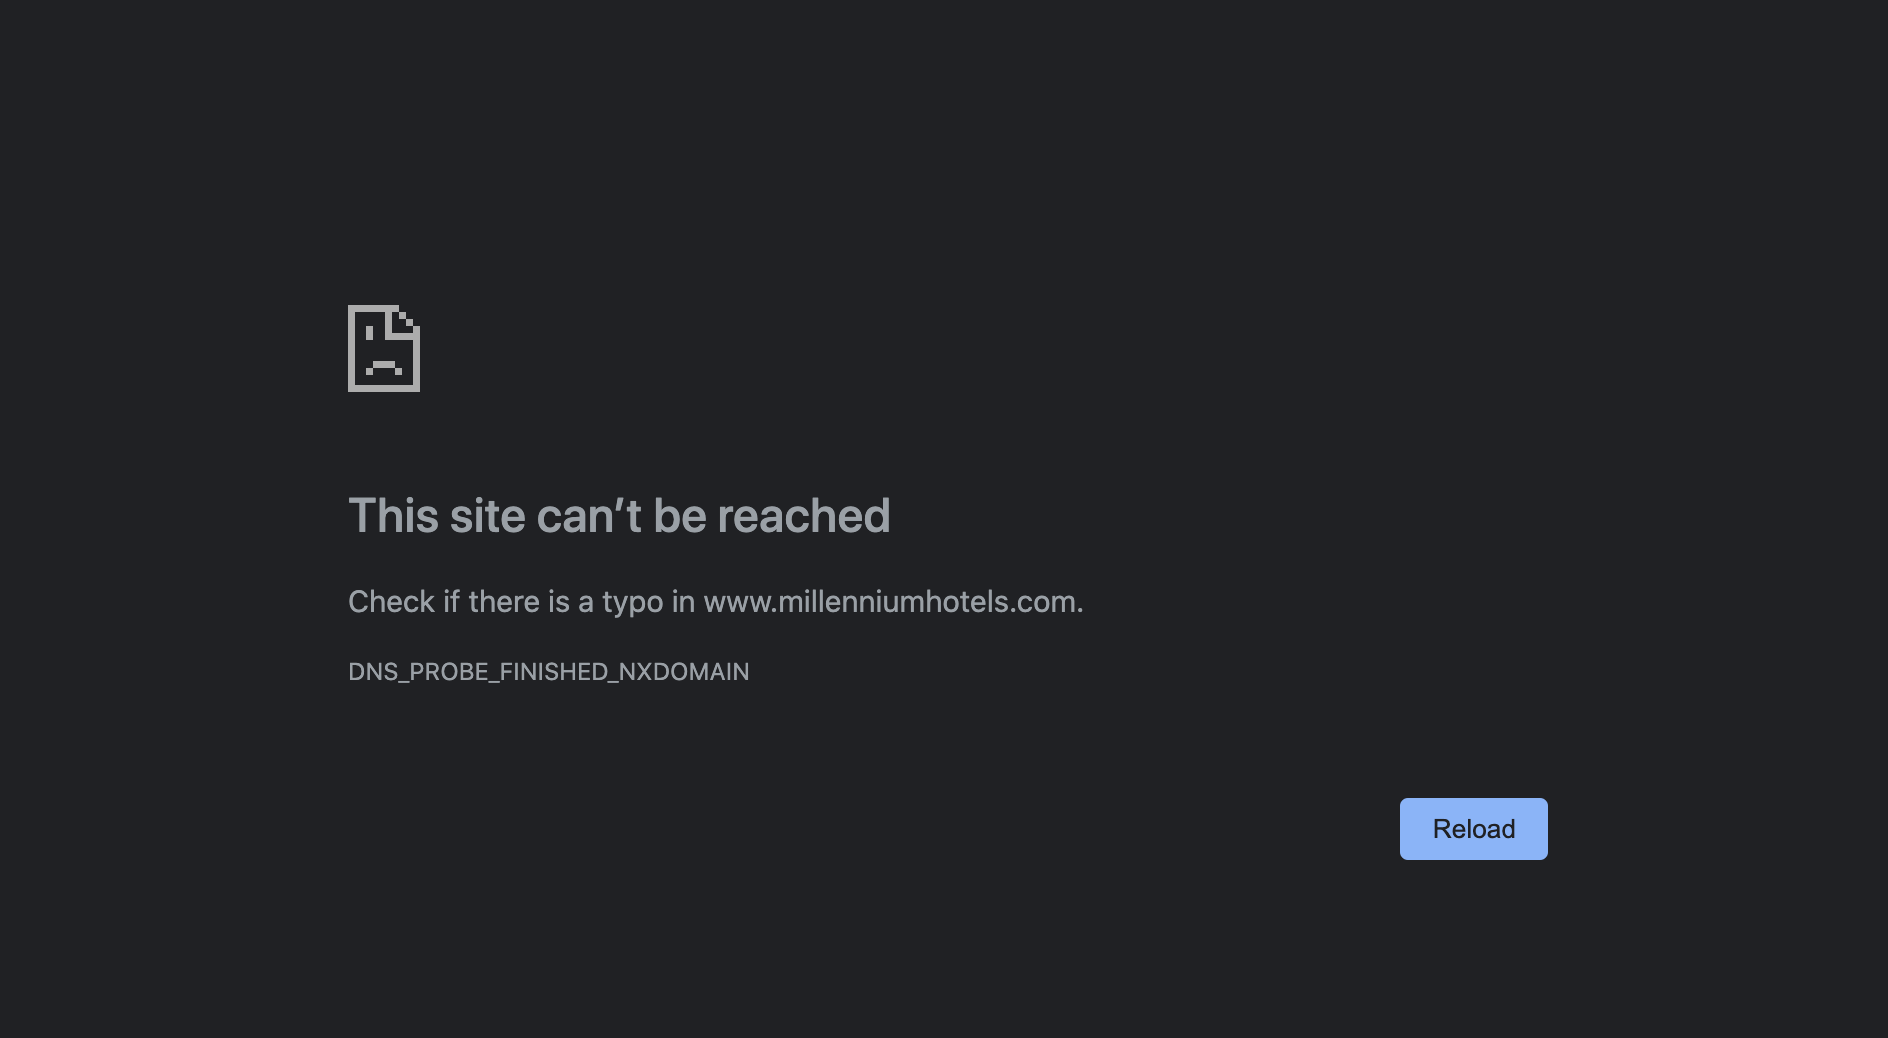 The website cannot be reached by the user